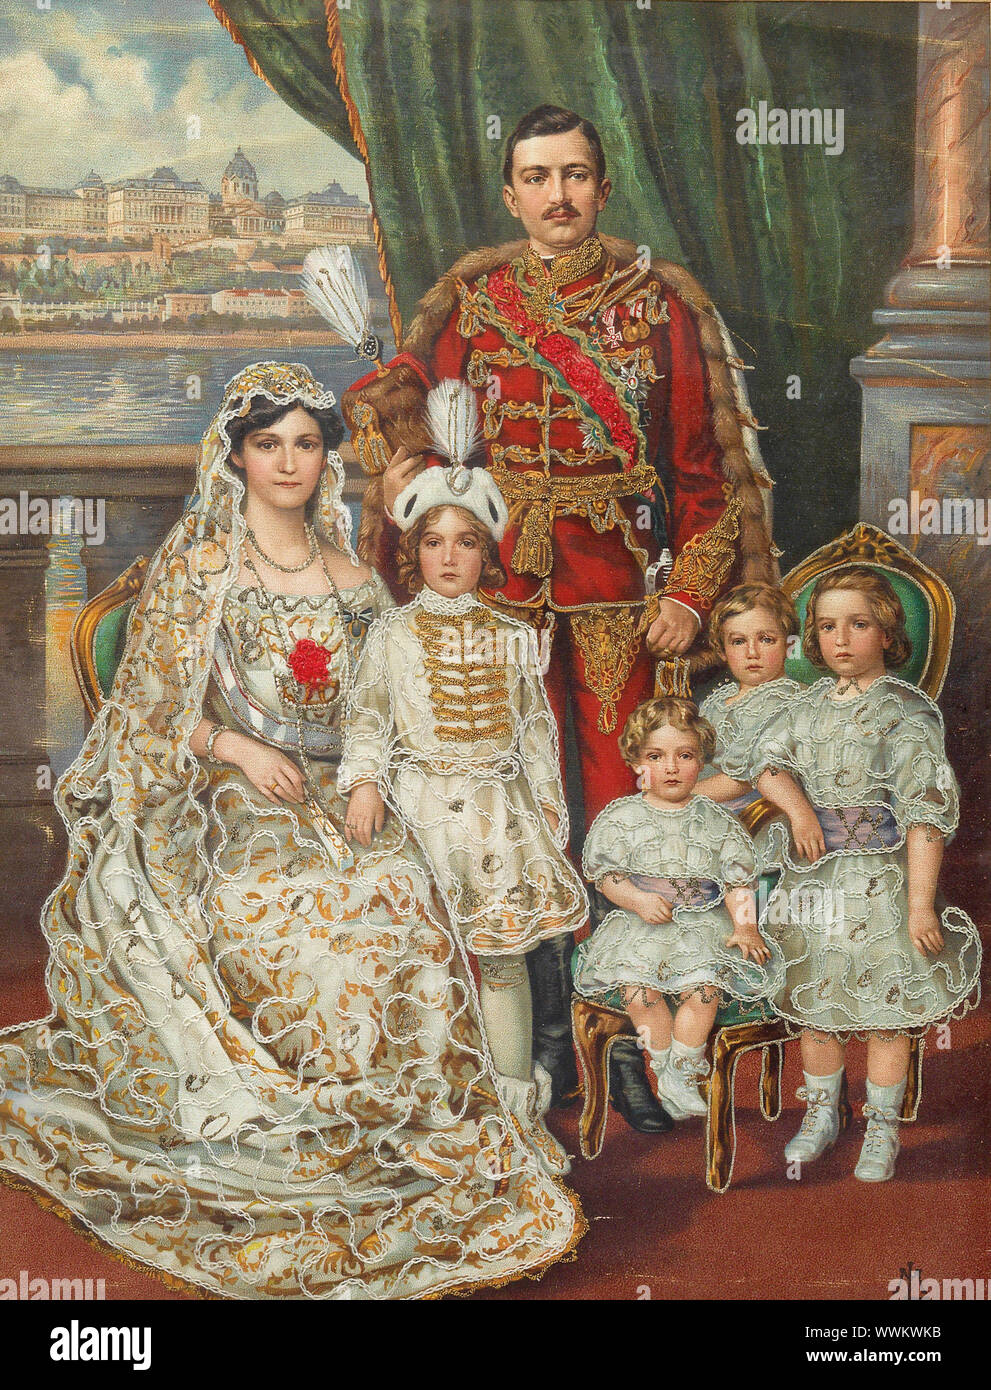 Emperor Charles I of Austria (1887-1922), with his wife Zita, Crown Prince Otto and the three other children, c. 1918. Private Collection. Stock Photo